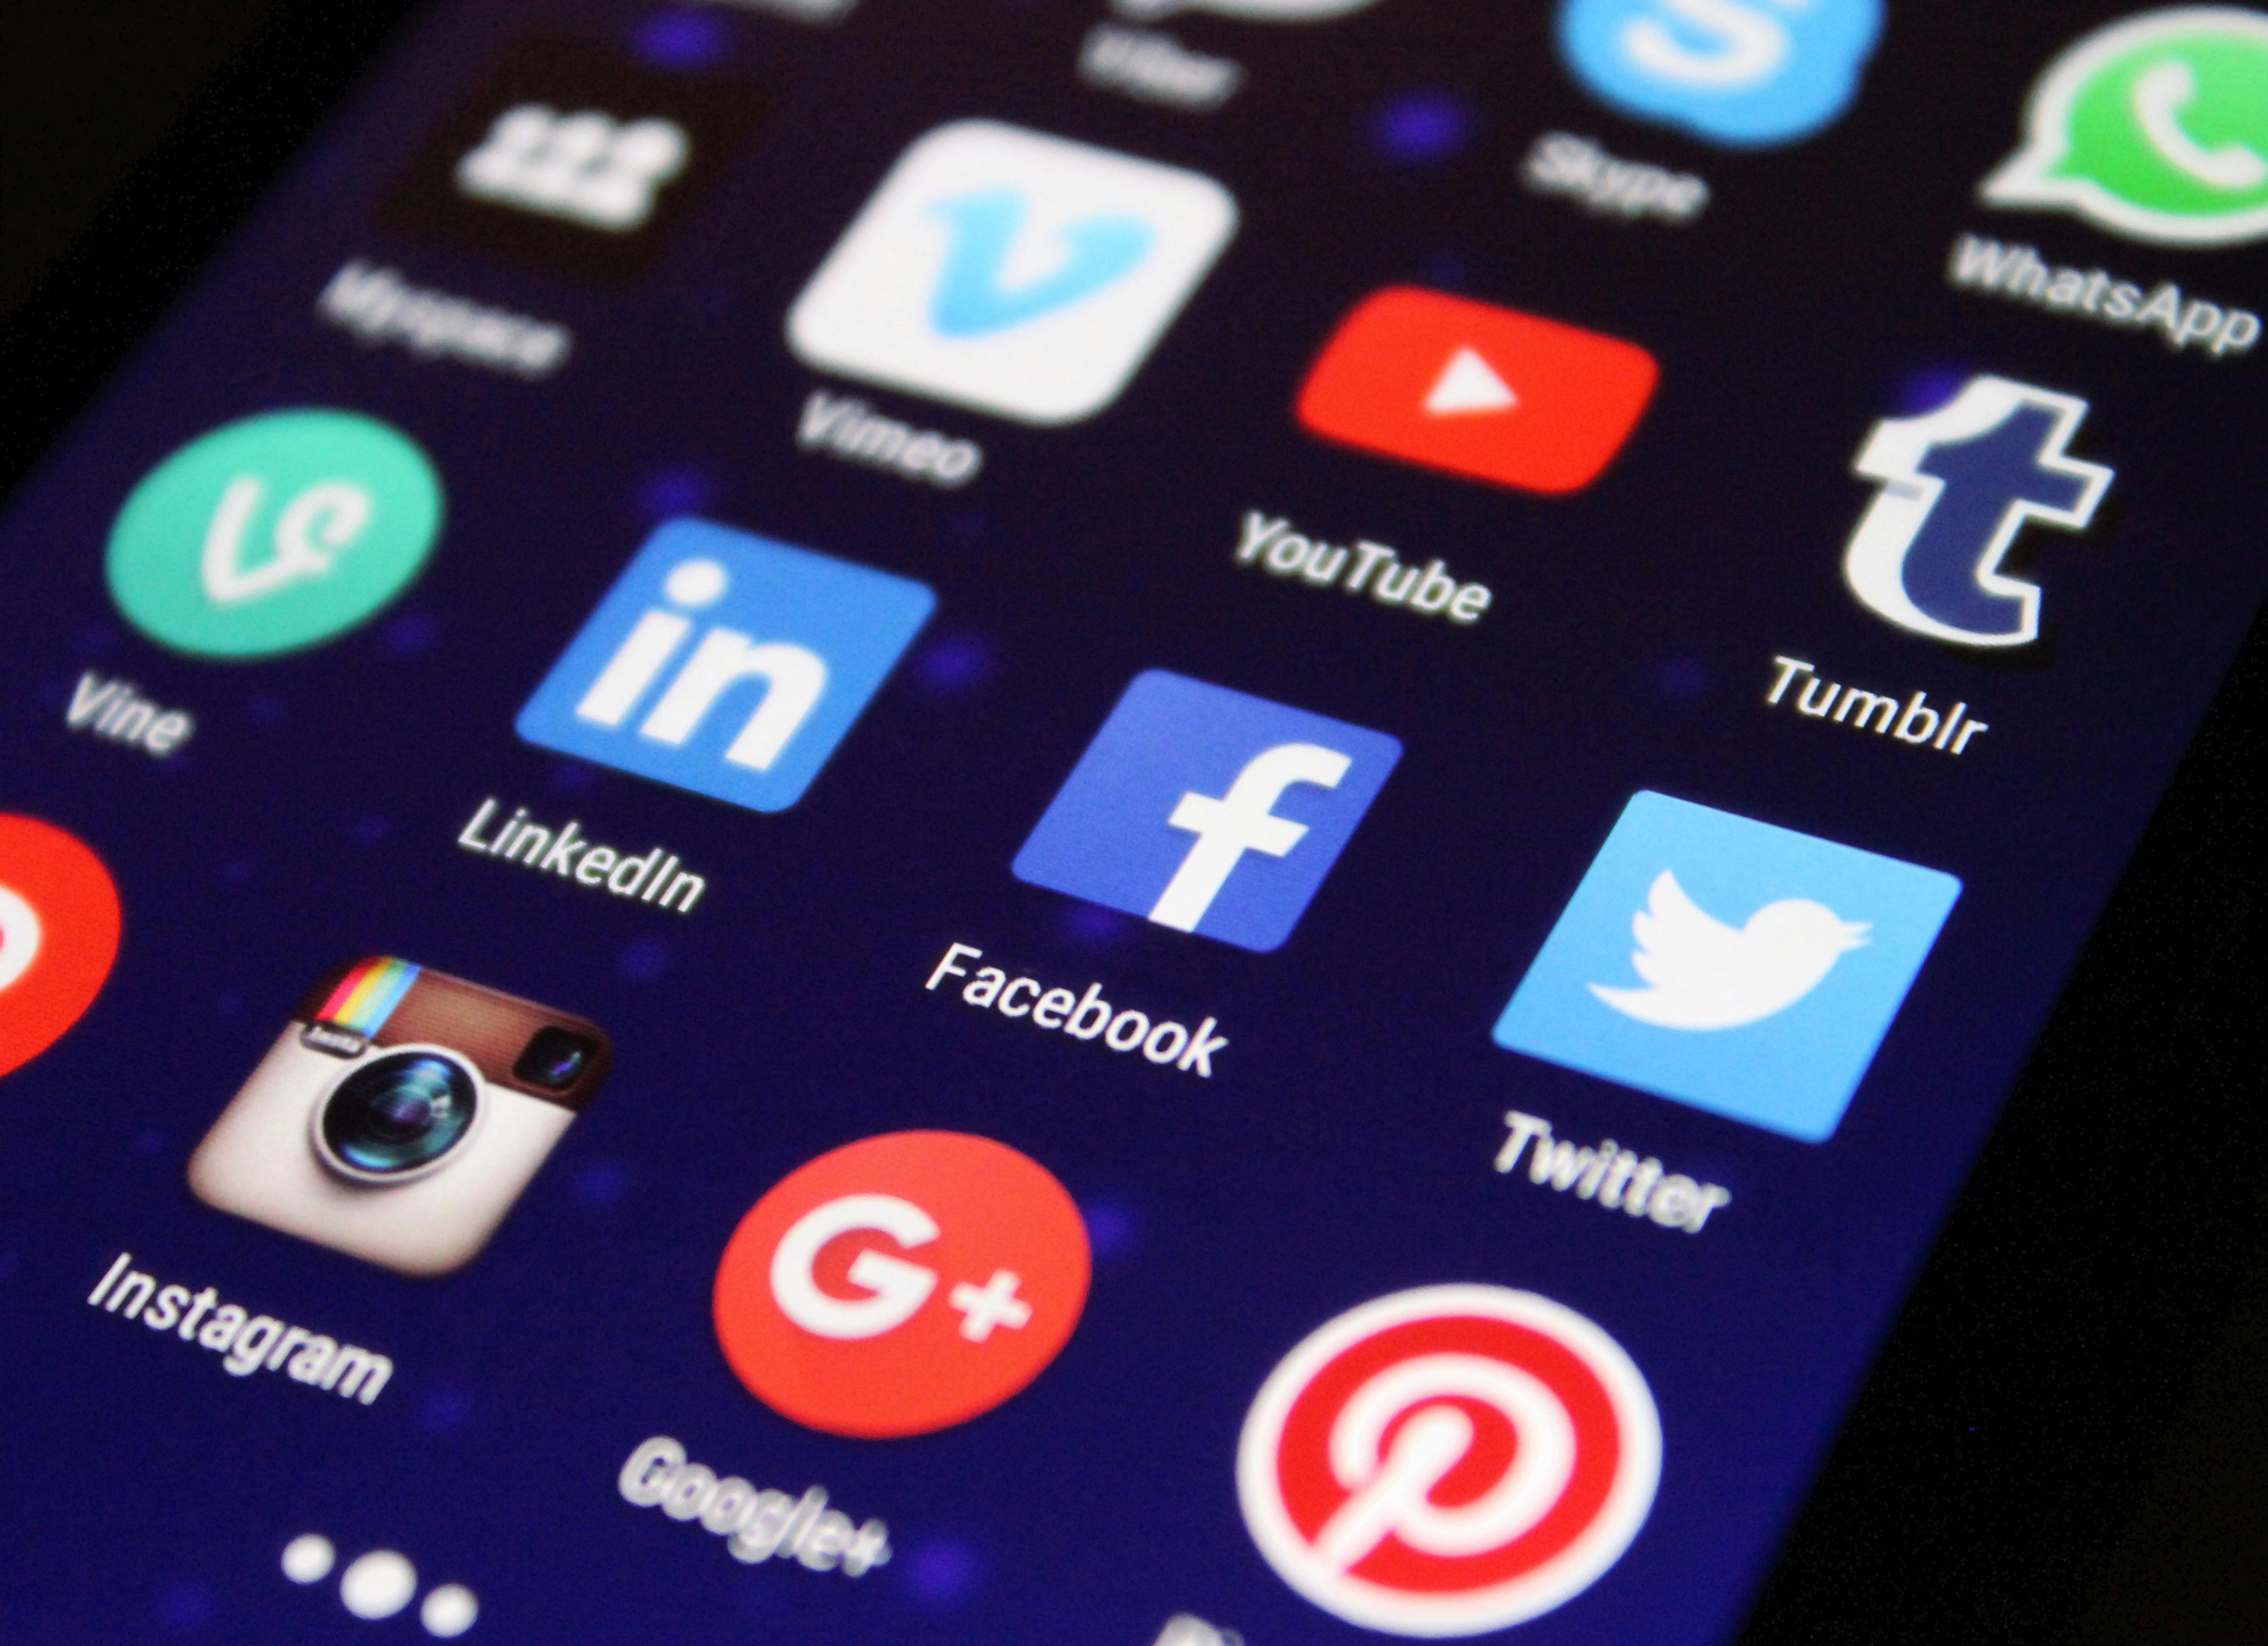 A phone's screen with various social media apps | Source: Pexels